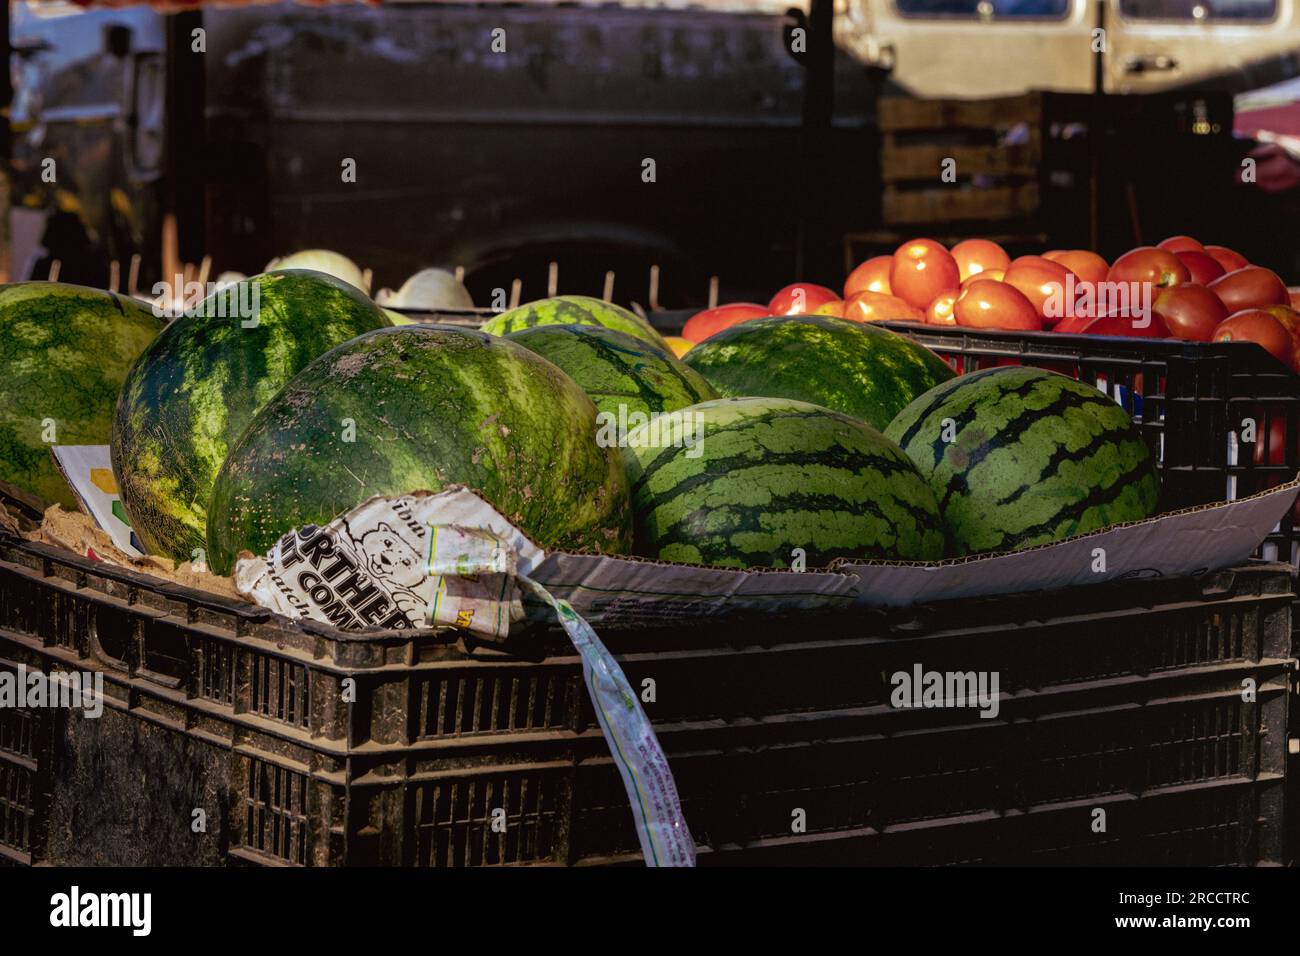 Watermelons Stock Photo